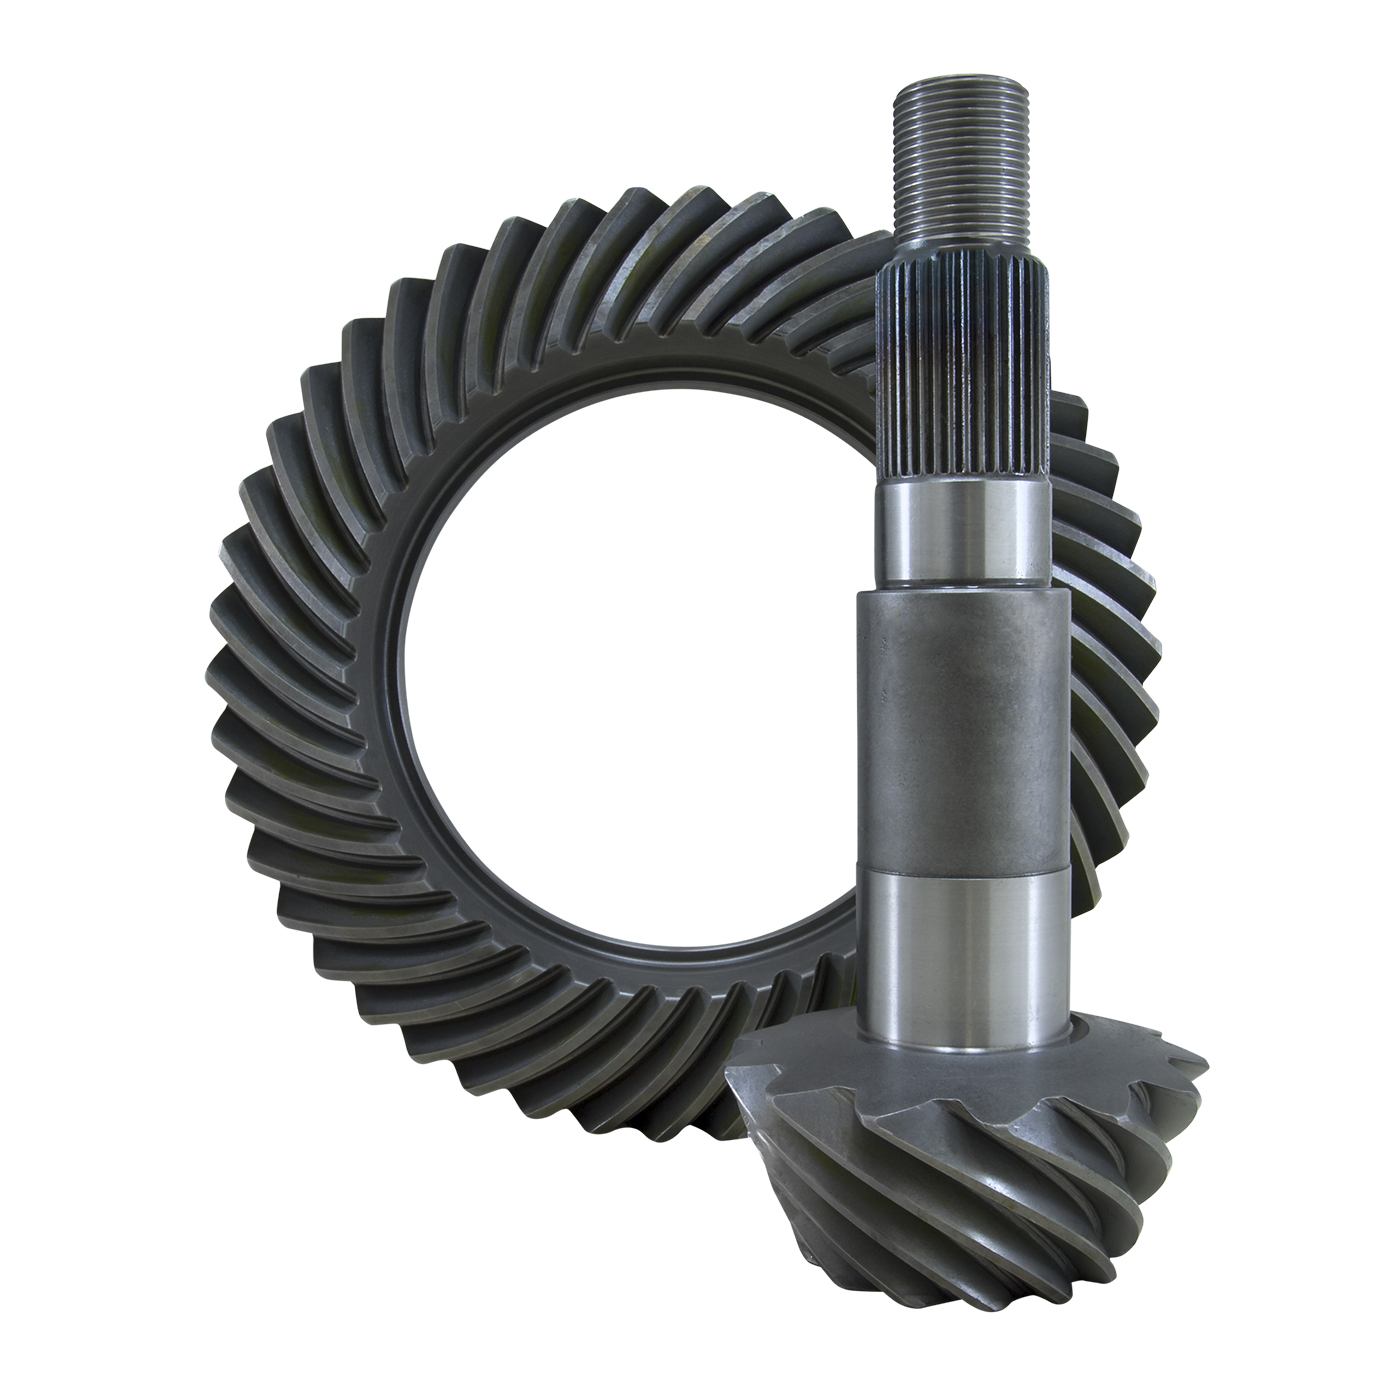 USA Standard replacement Ring & Pinion "thick" gear set for Dana 80, 4.11 ratio